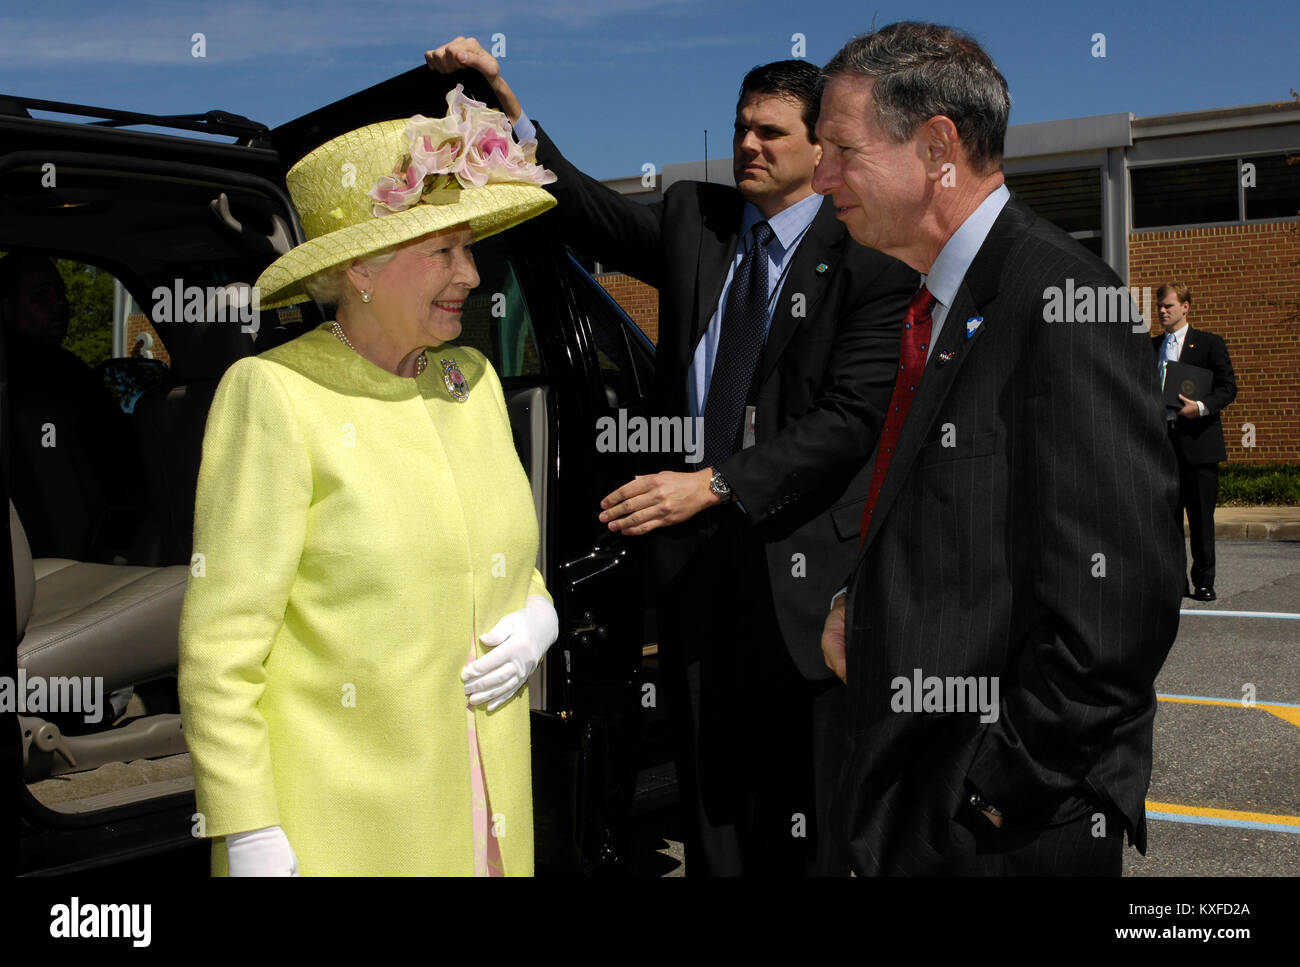 Queen Elizabeth II, left, is greeted by NASA Administrator Michael Griffin to the NASA Goddard Space Flight Center, Tuesday, May 8, 2007, in Greenbelt, Md. as one of the last stops on her six-day visit to the United States. Photo Credit: 'NASA/Bill Ingalls'/ CNP / MediaPunch Stock Photo